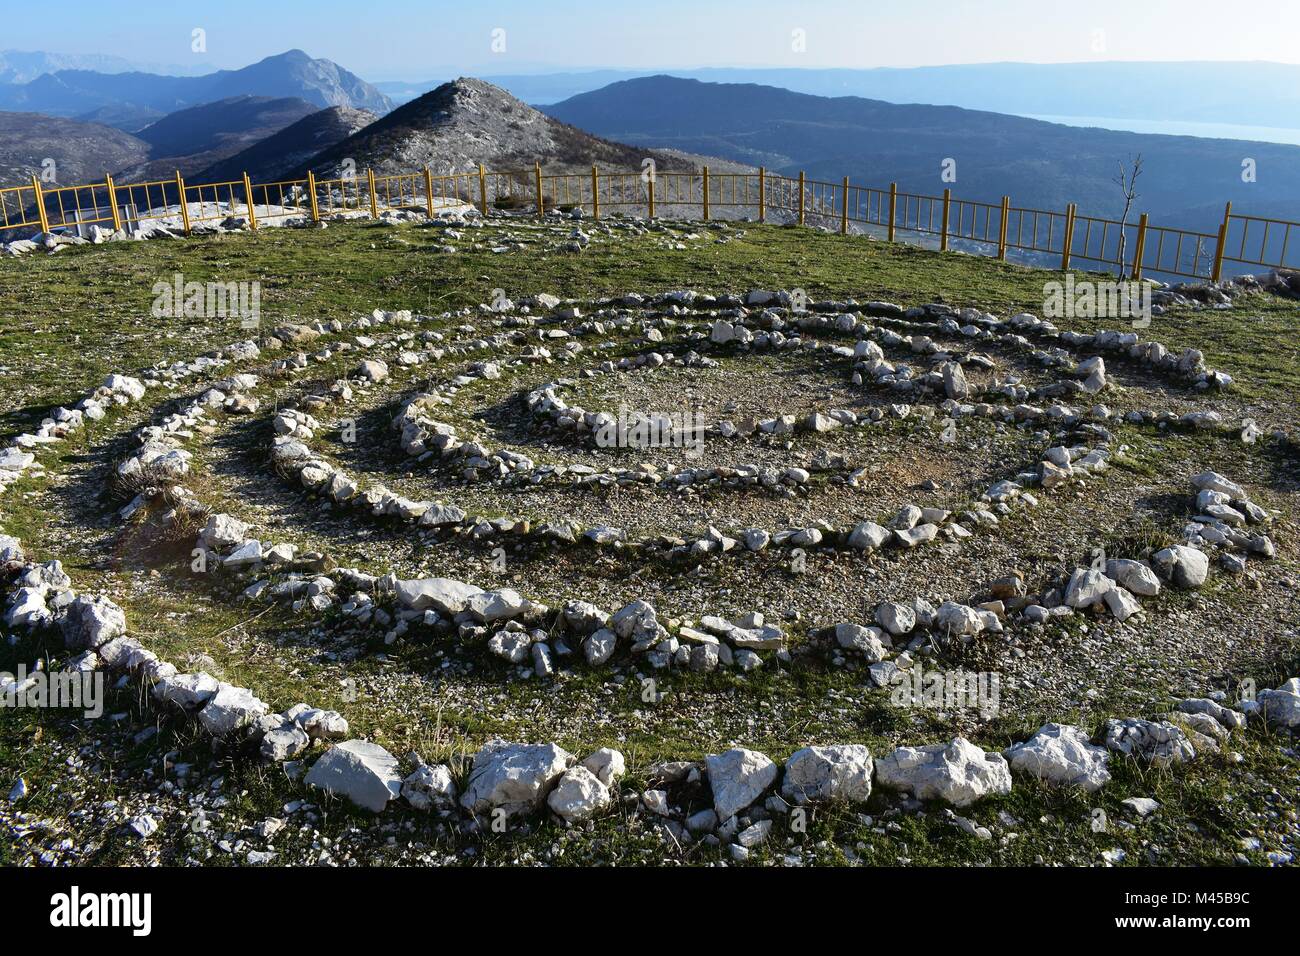 Field full of healing stones. Stone circle at the mountain Stock Photo